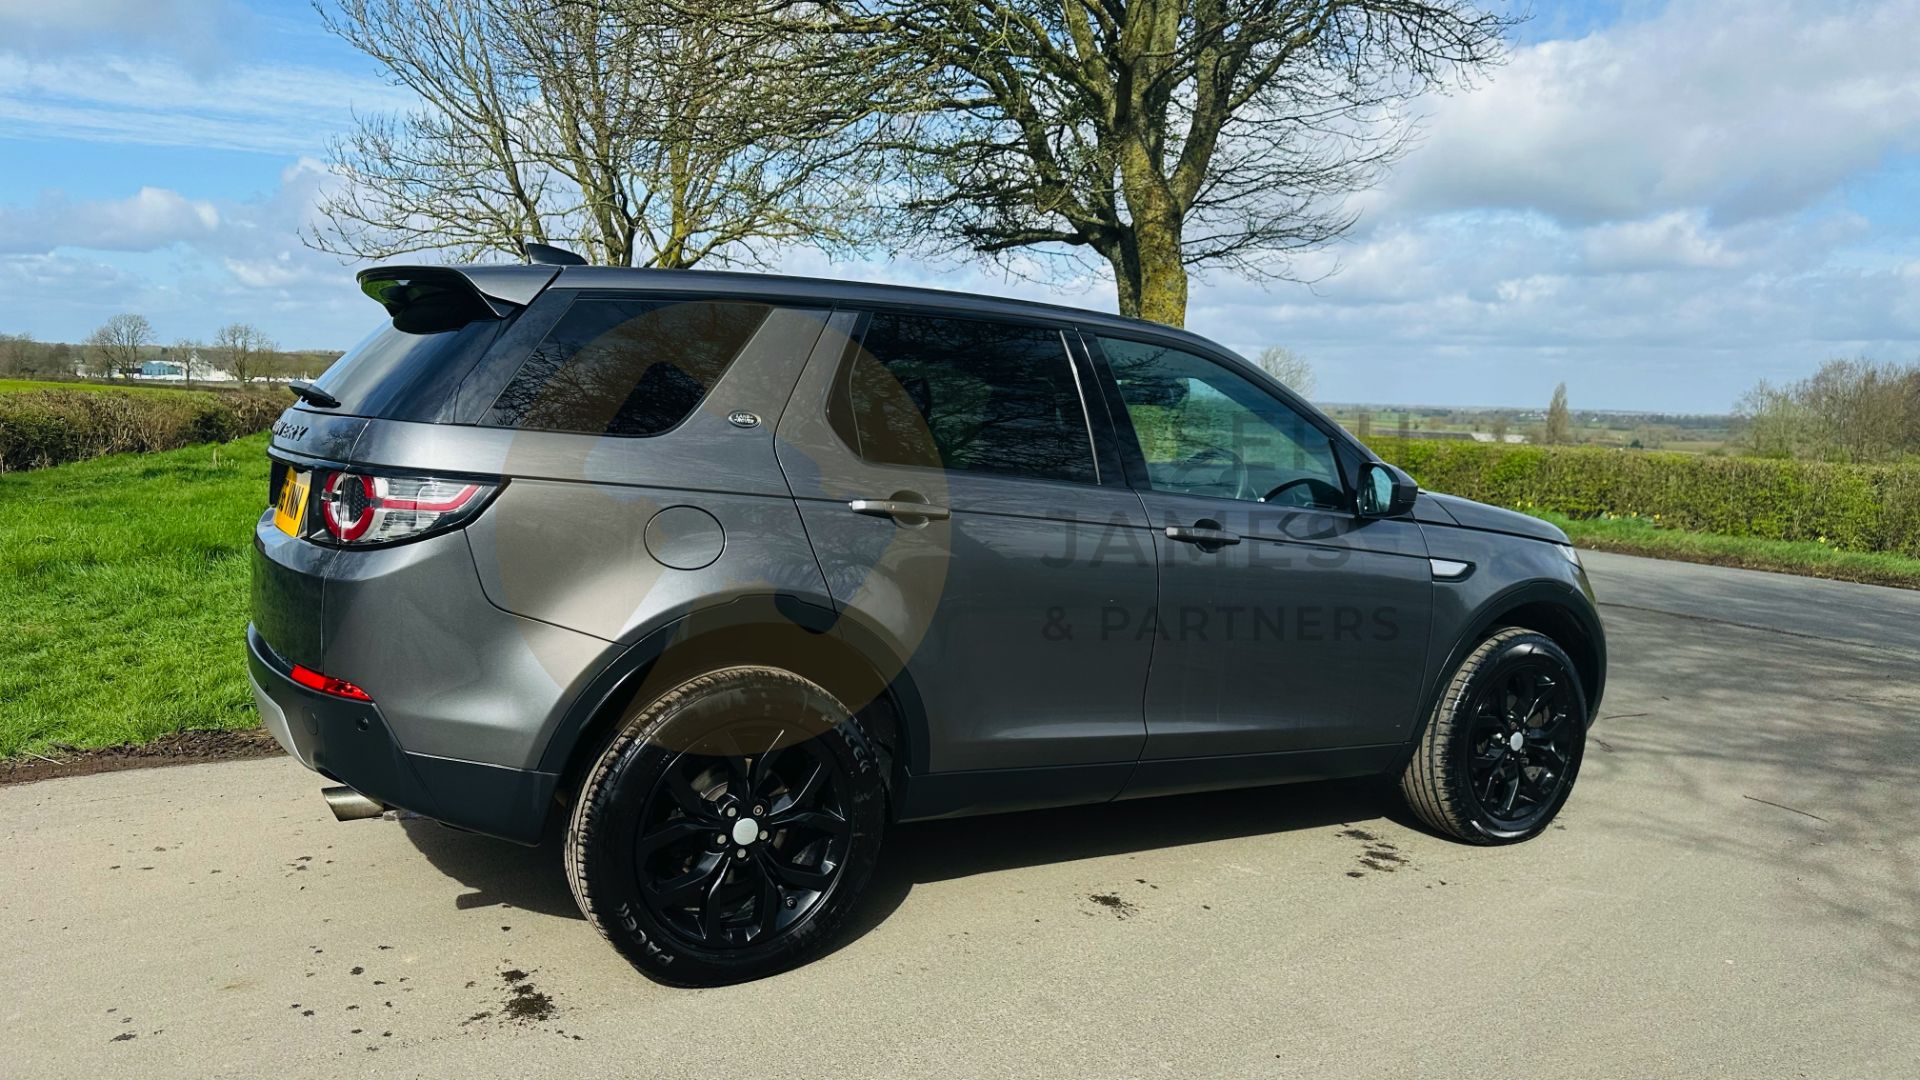 (On Sale) LAND ROVER DISCOVERY SPORT *HSE EDITION* 7 SEATER SUV (2017 - EURO 6) 2.0 TD4 - AUTOMATIC - Image 13 of 48